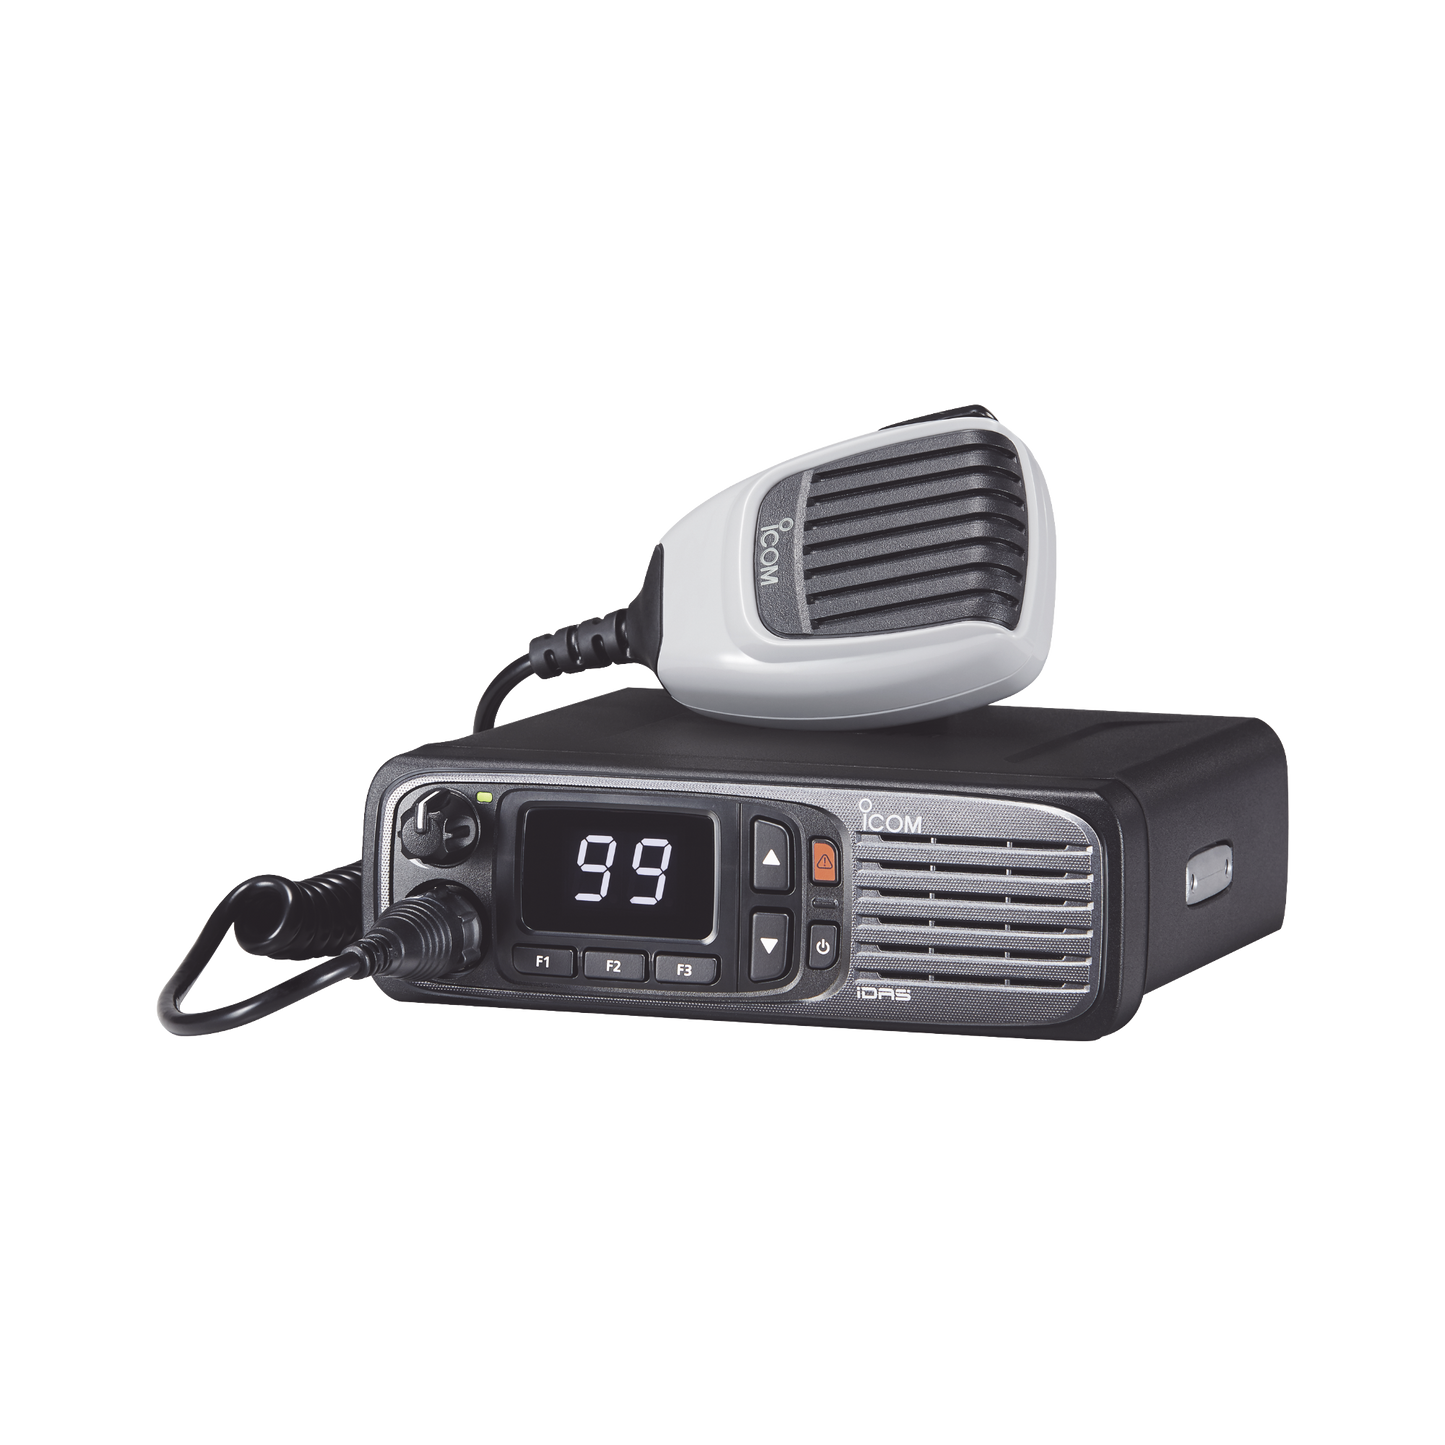 Digital mobile radio with numerical display, in the range of 380-470MHz, 99 selectable channels, GPS, and bluethooth. Includes microphone, power cable and bracket.